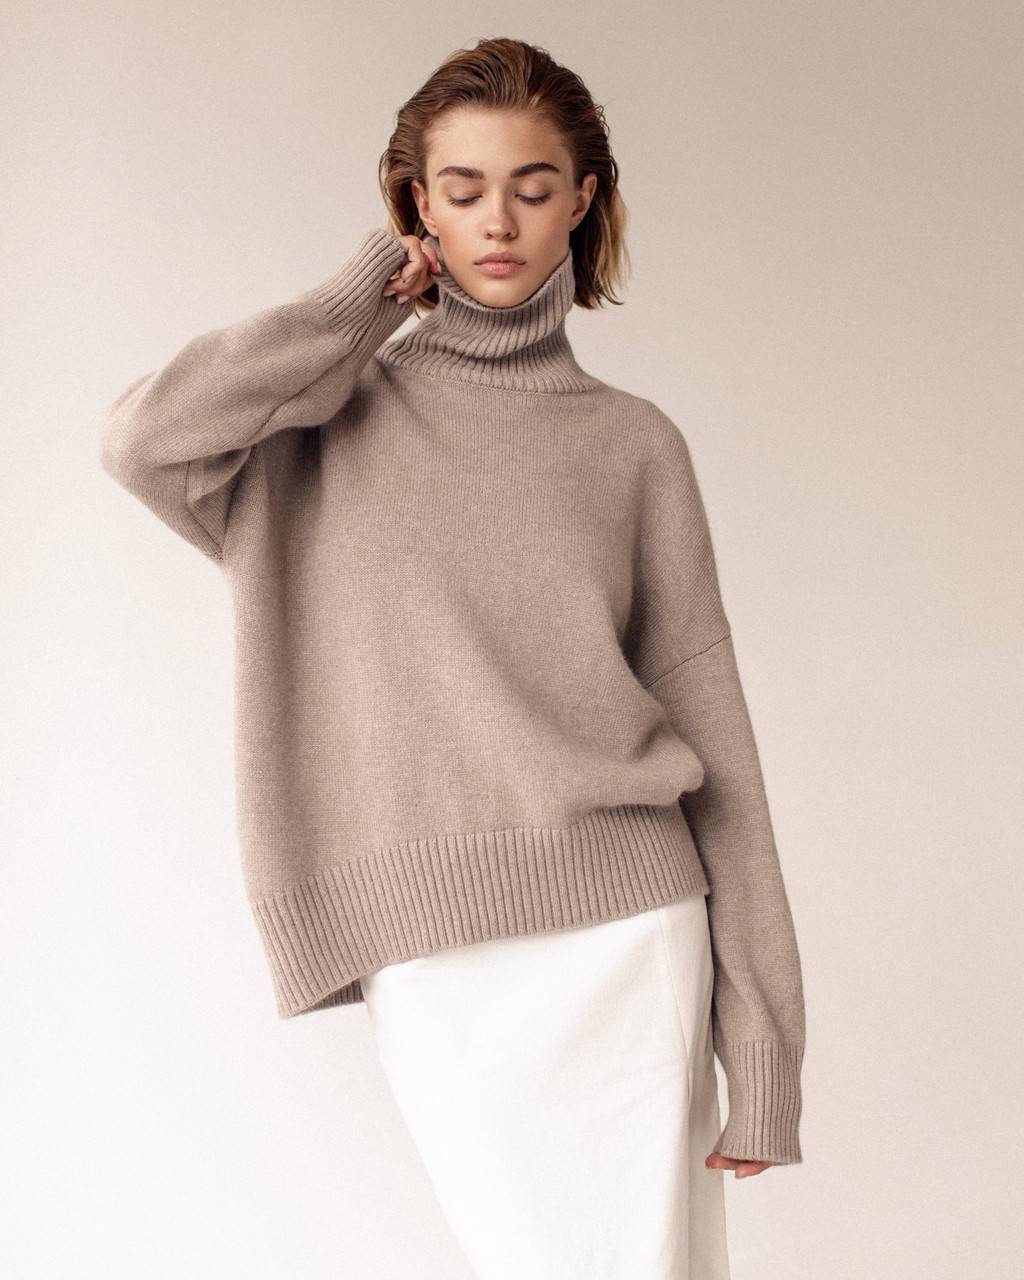 Cashmere > Oversized extremely soft 100% cashmere sweater Buy from e-shop